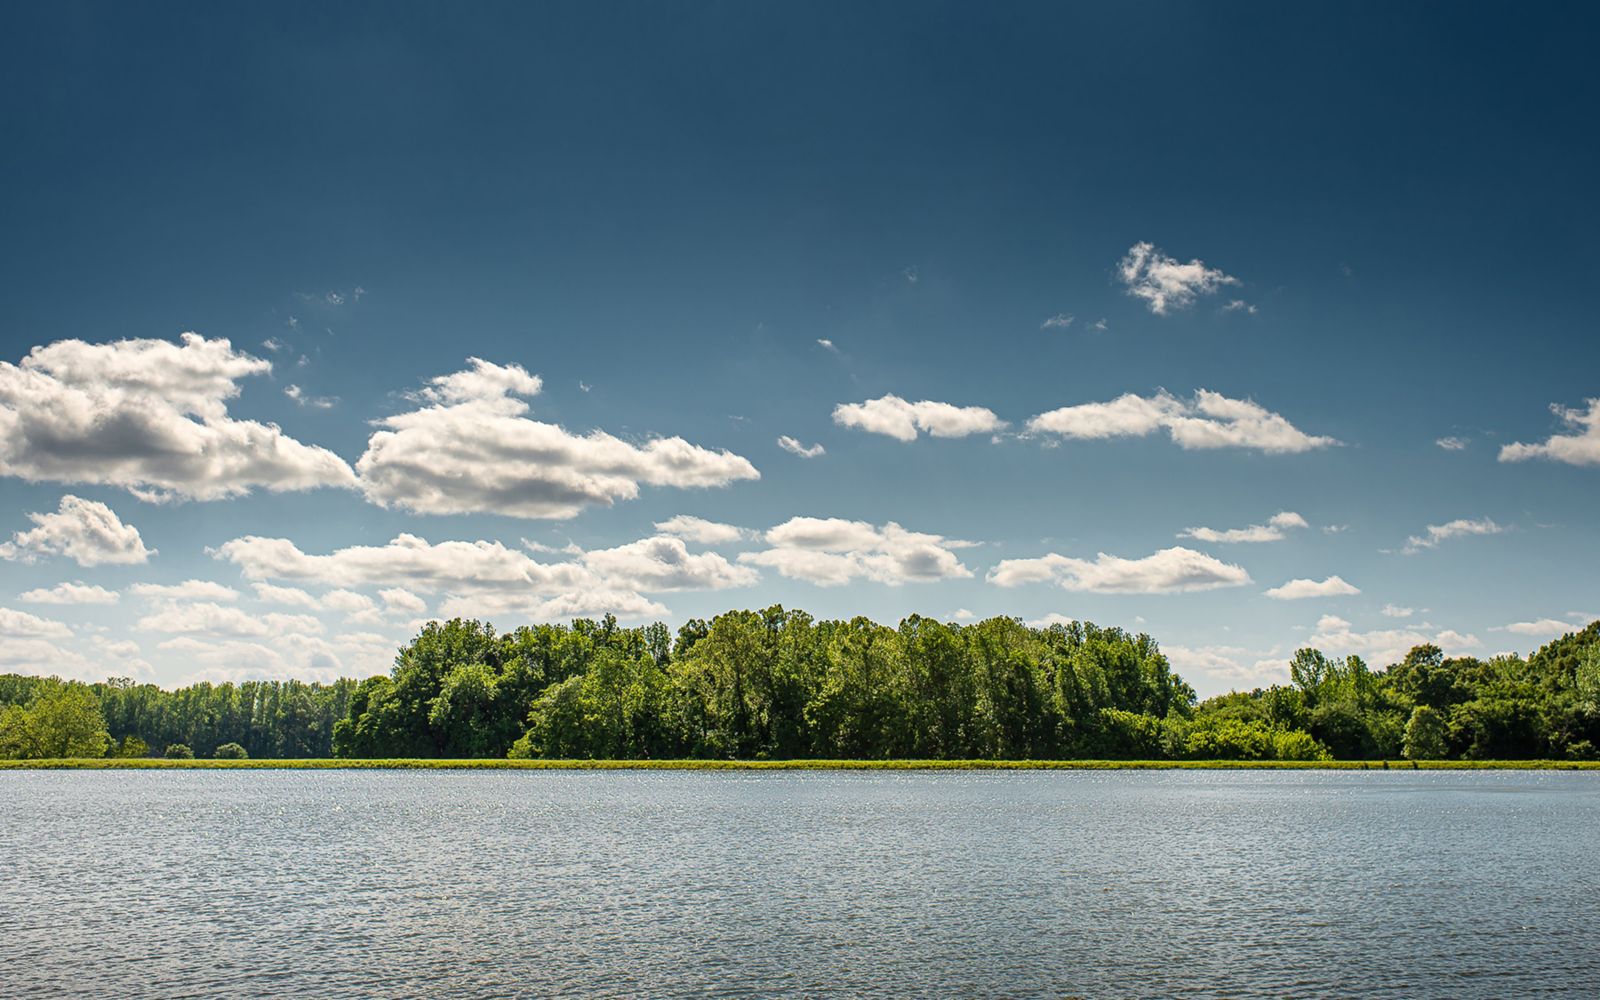 Large lake in the foreground with green trees on the shore on a sunny day.